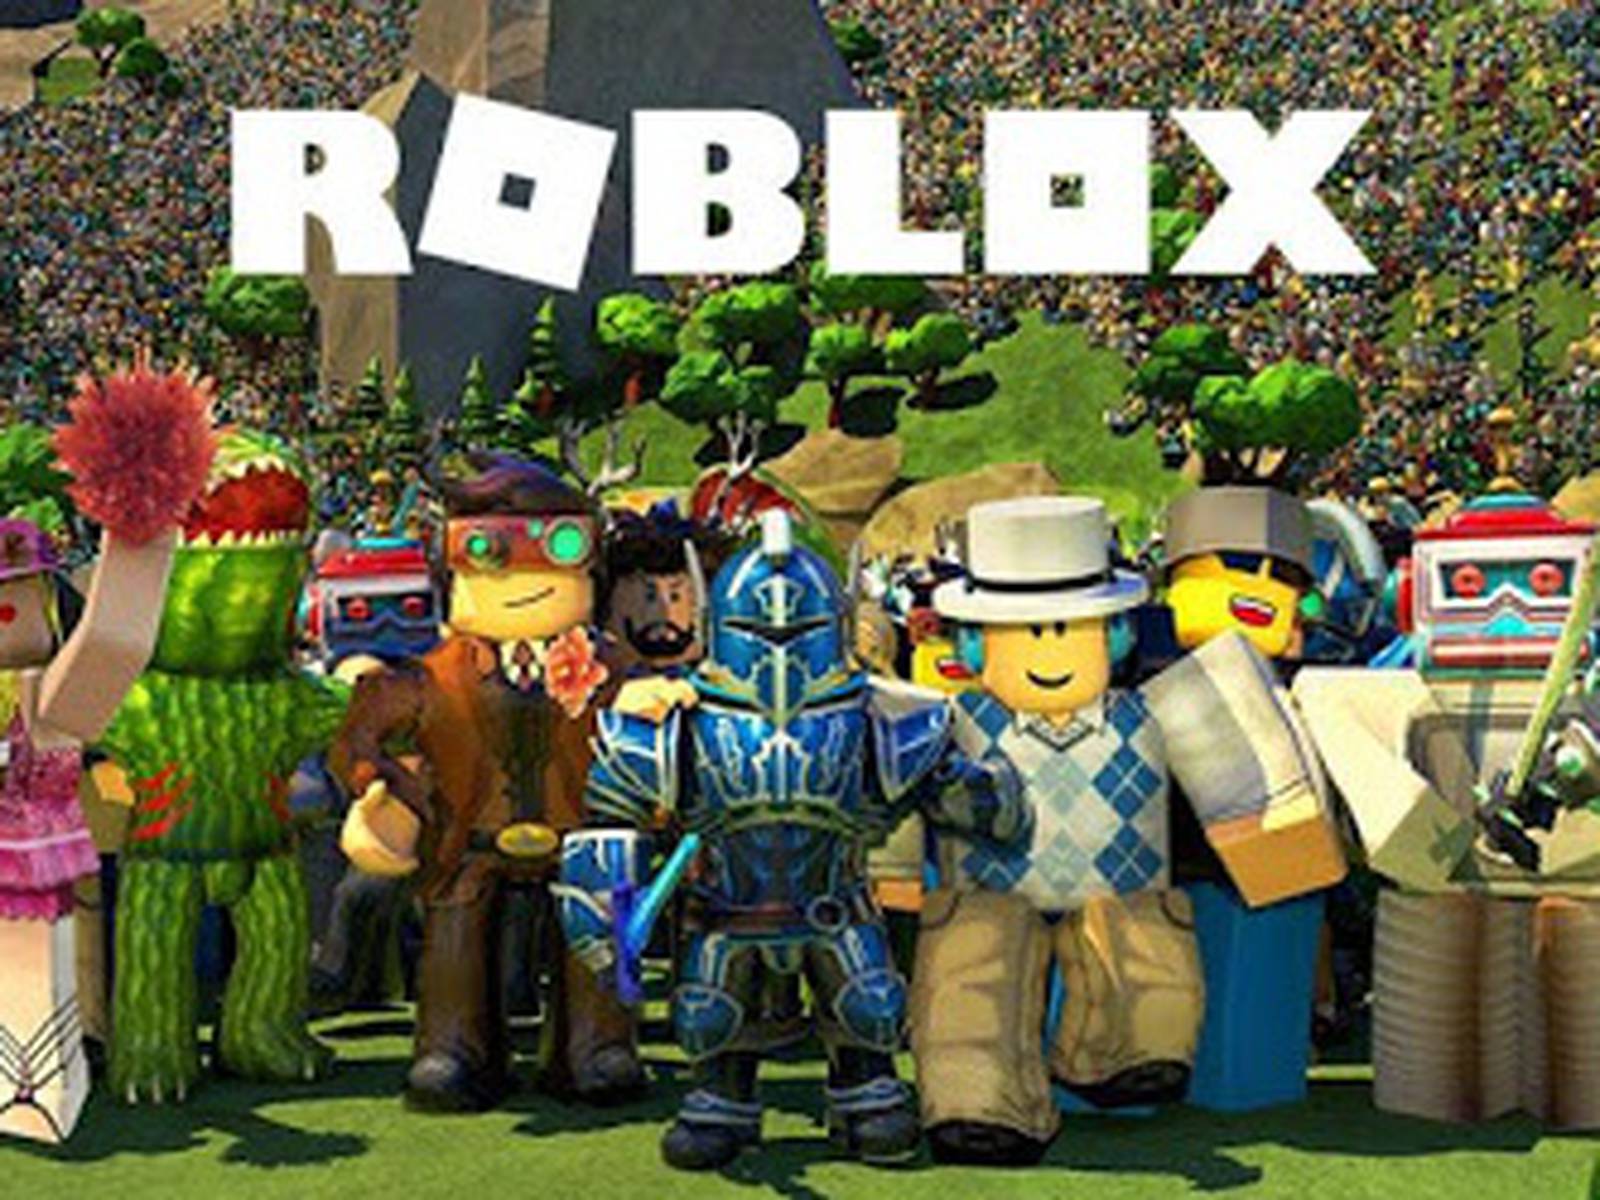 Roblox Game Developers are starting to give bonuses to premium